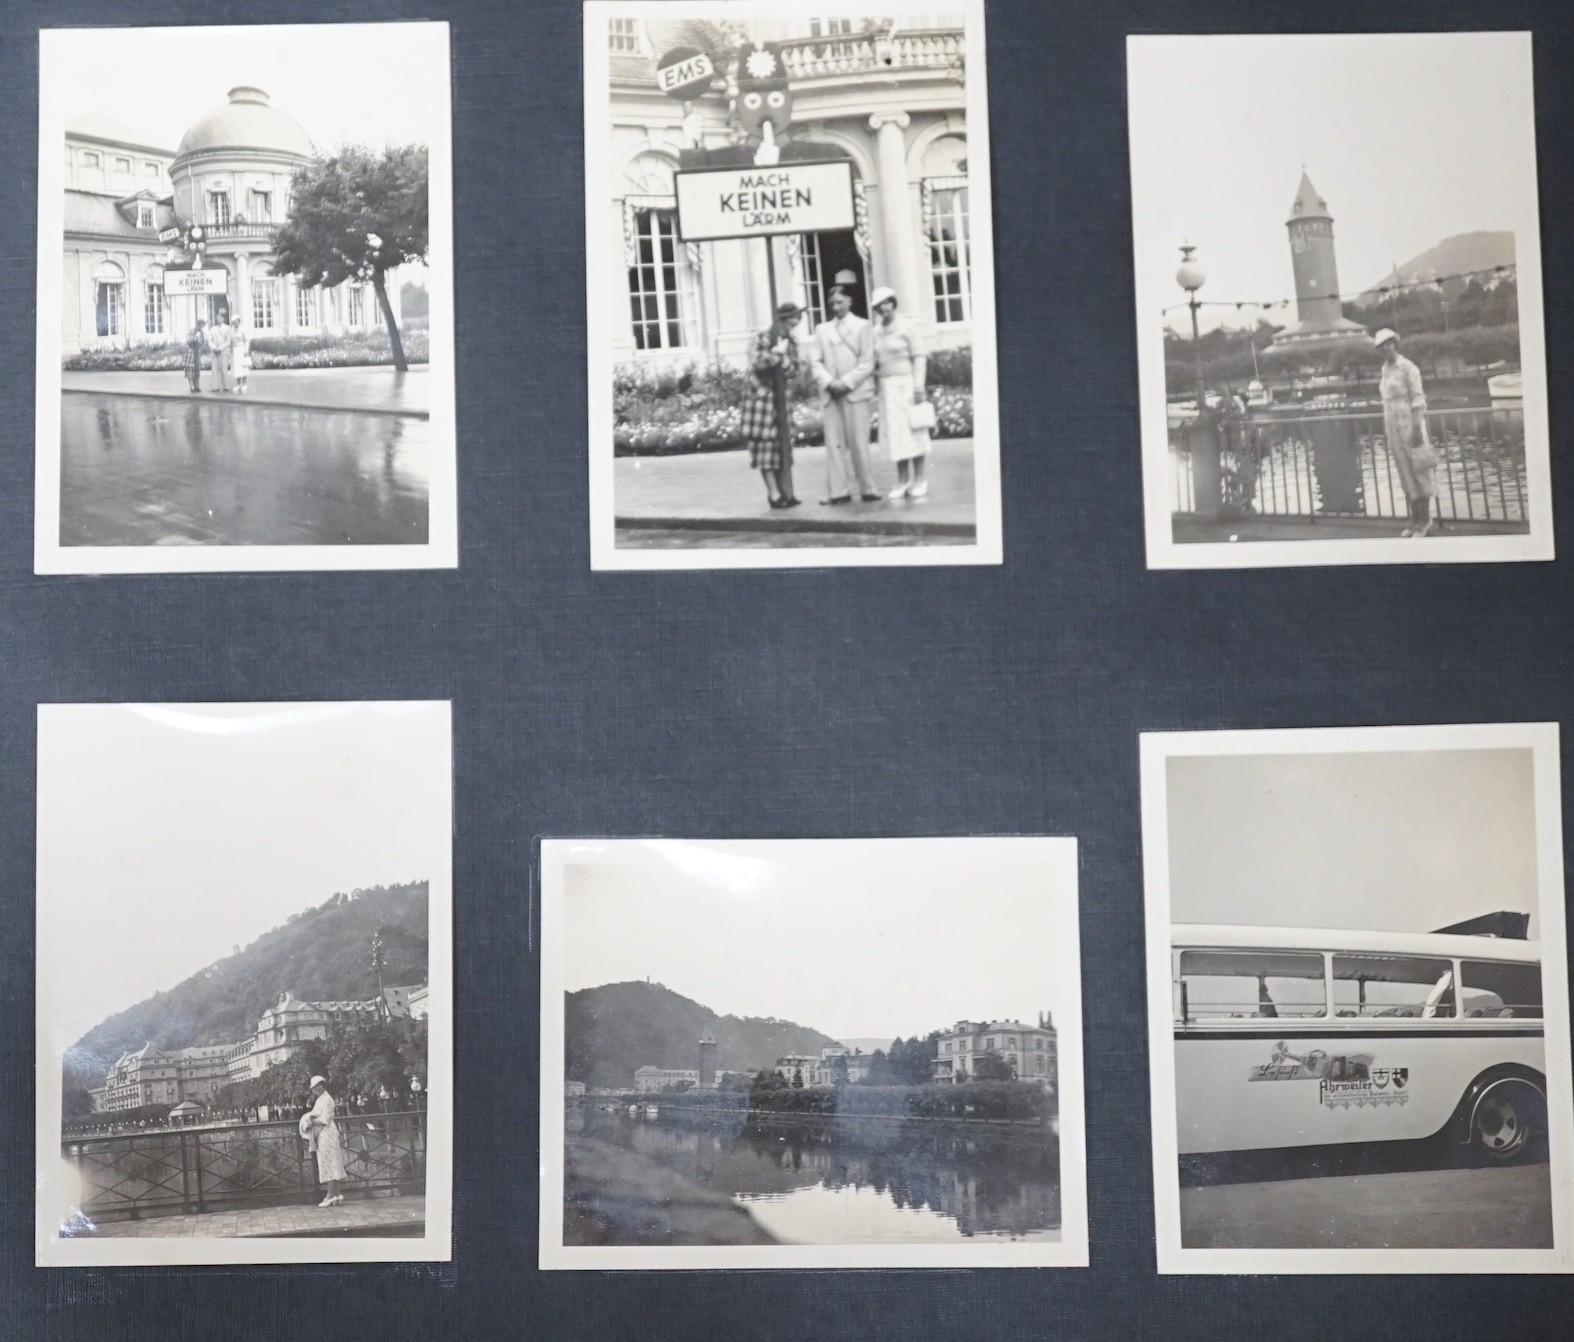 An English photograph album with photos of a holiday to Germany in August 1936.